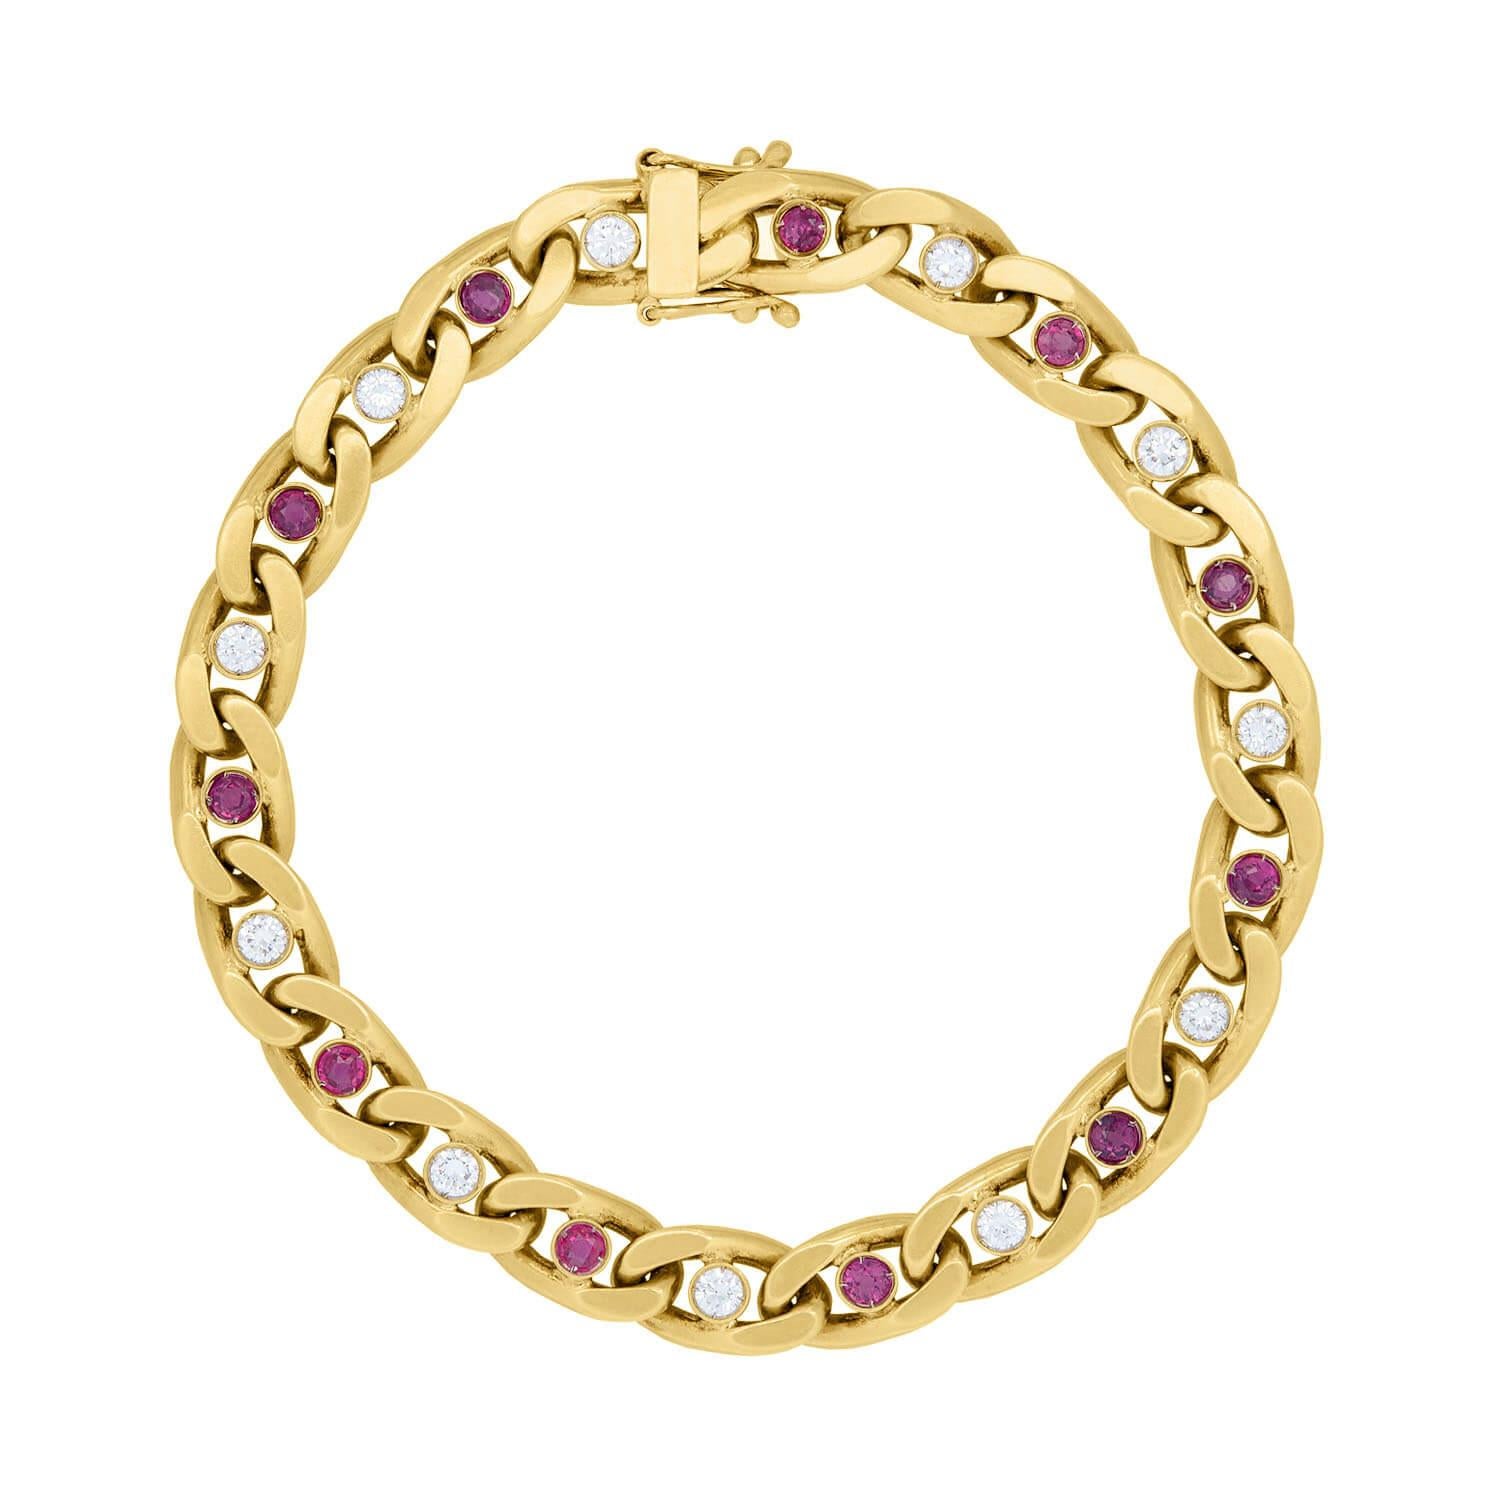 CARTIER Vintage 18k/Platinum Diamond and Ruby Cuban Link Bracelet In Good Condition For Sale In Narberth, PA